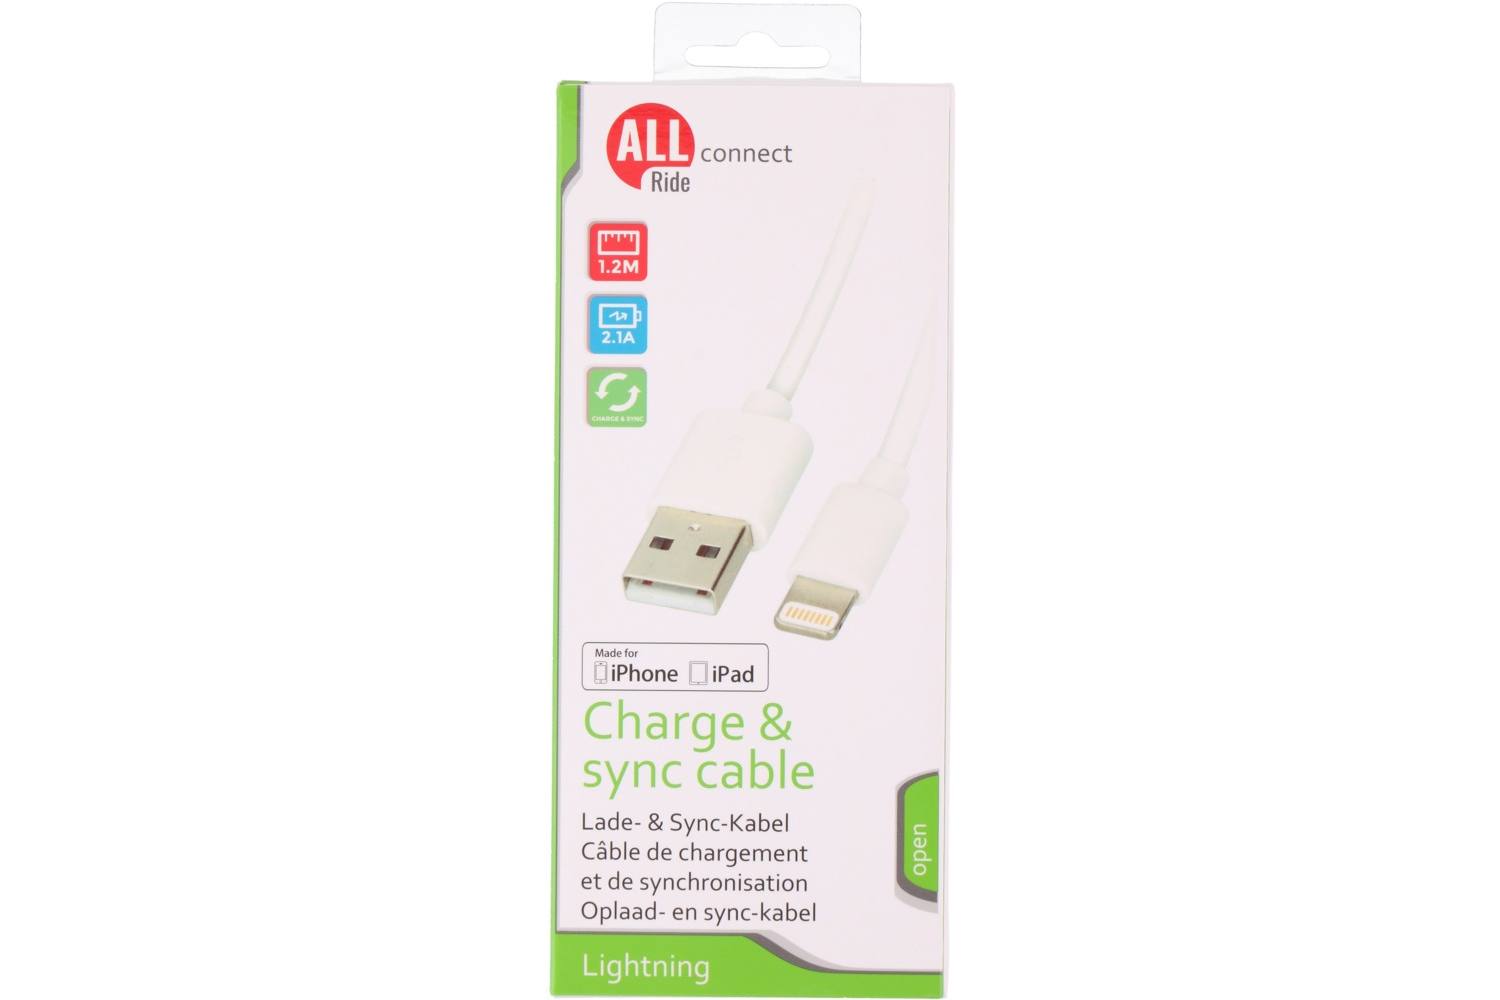 Sync and charge cable, AllRide Connect, 2.1A, USB A to lightning, white, 120cm, PVC 2